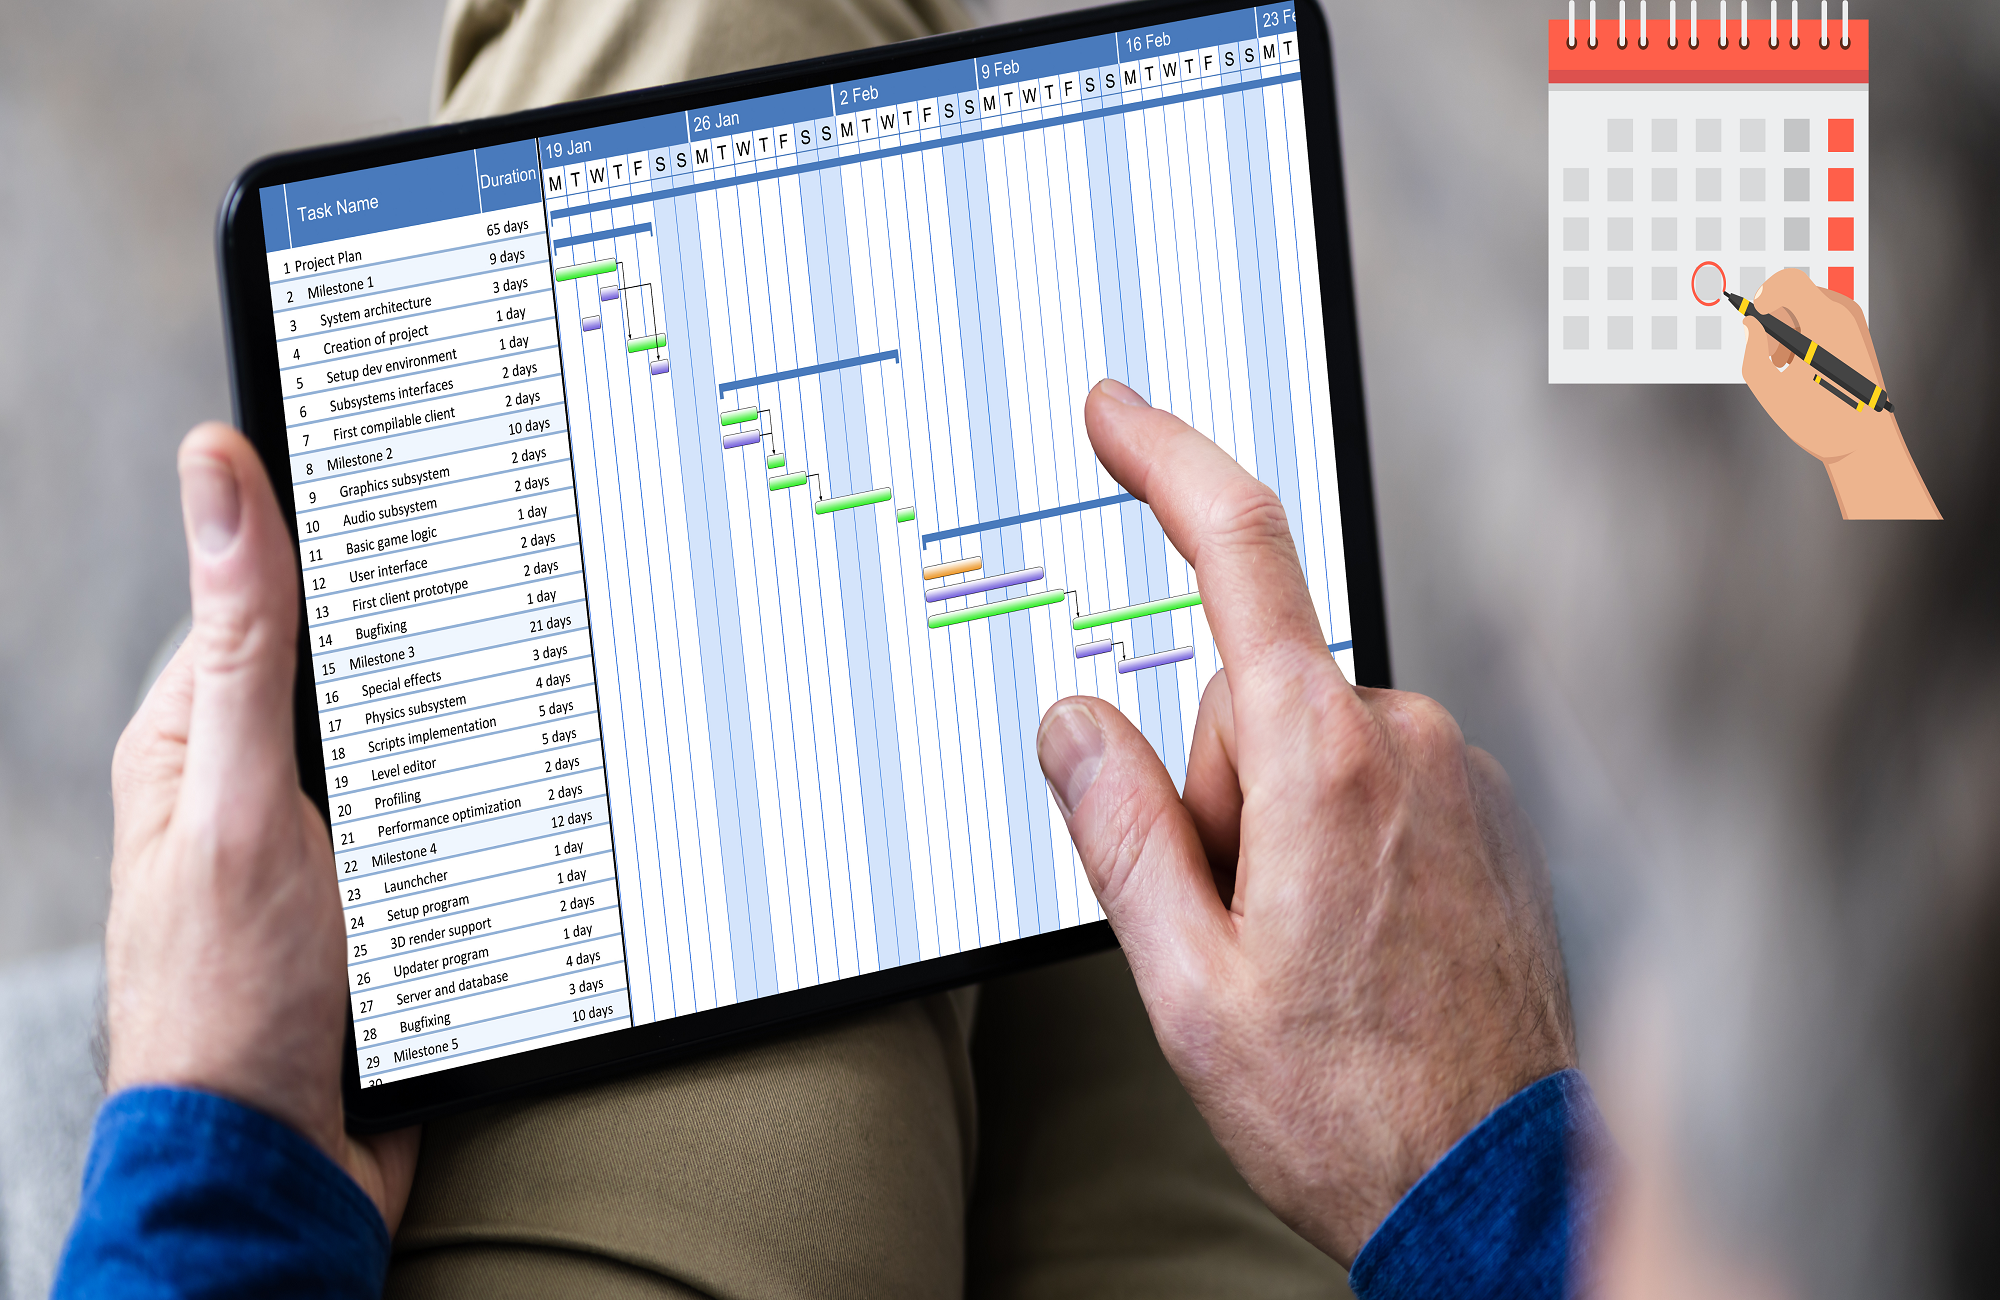 Calendar Scheduling Software to Never Miss an Appointment